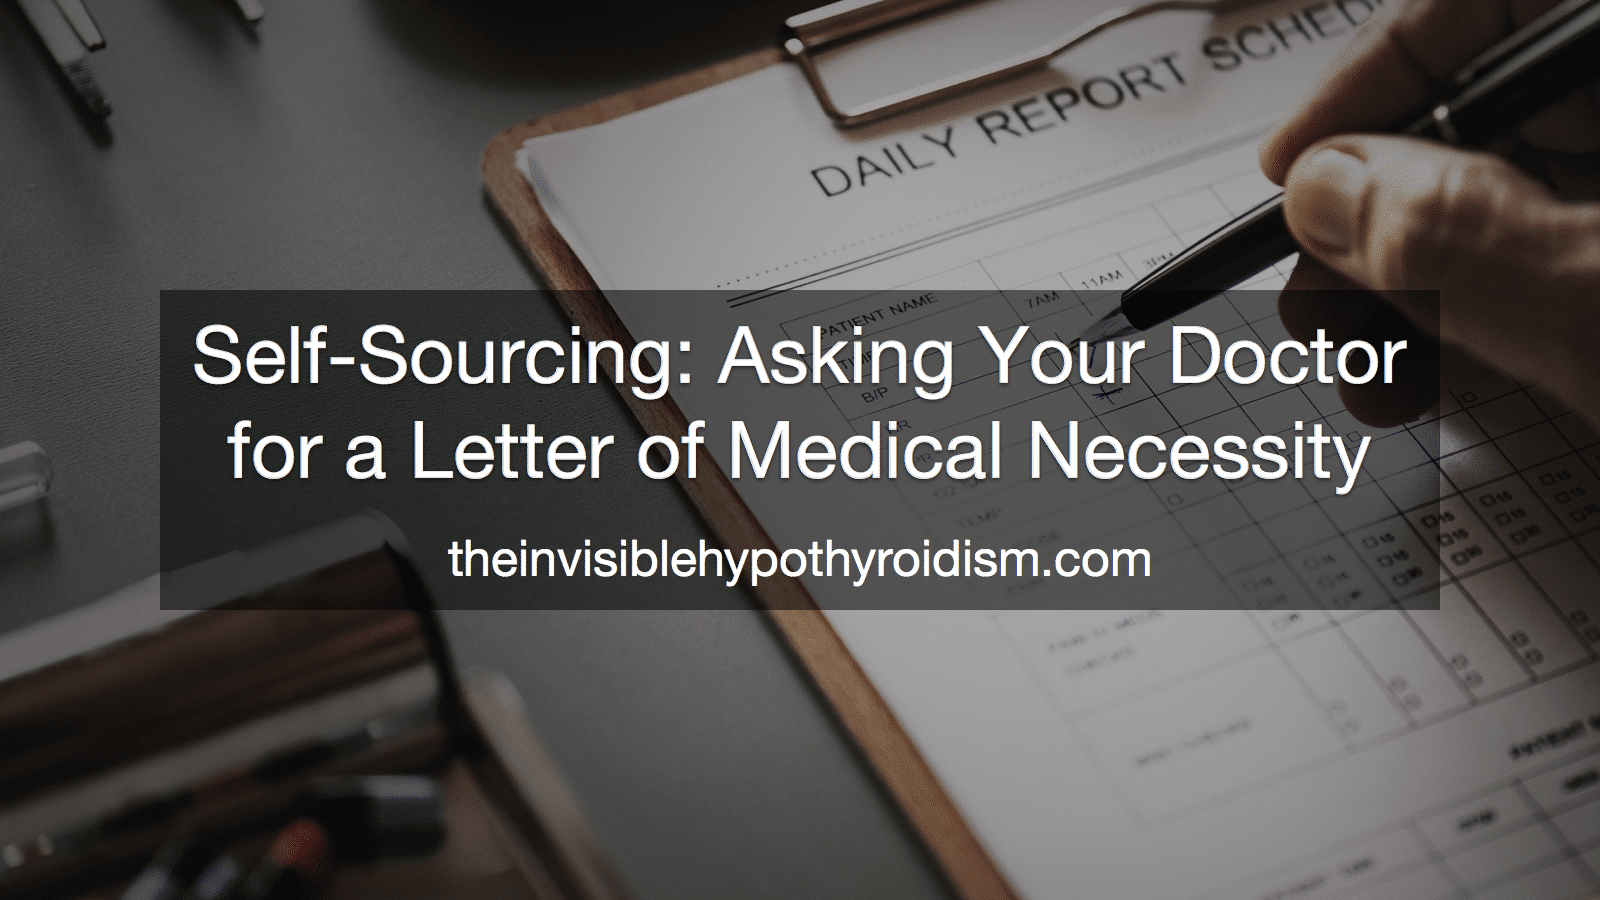 Thyroid Patients Who Self-Source: Asking Your Doctor for a Letter of Medical Necessity